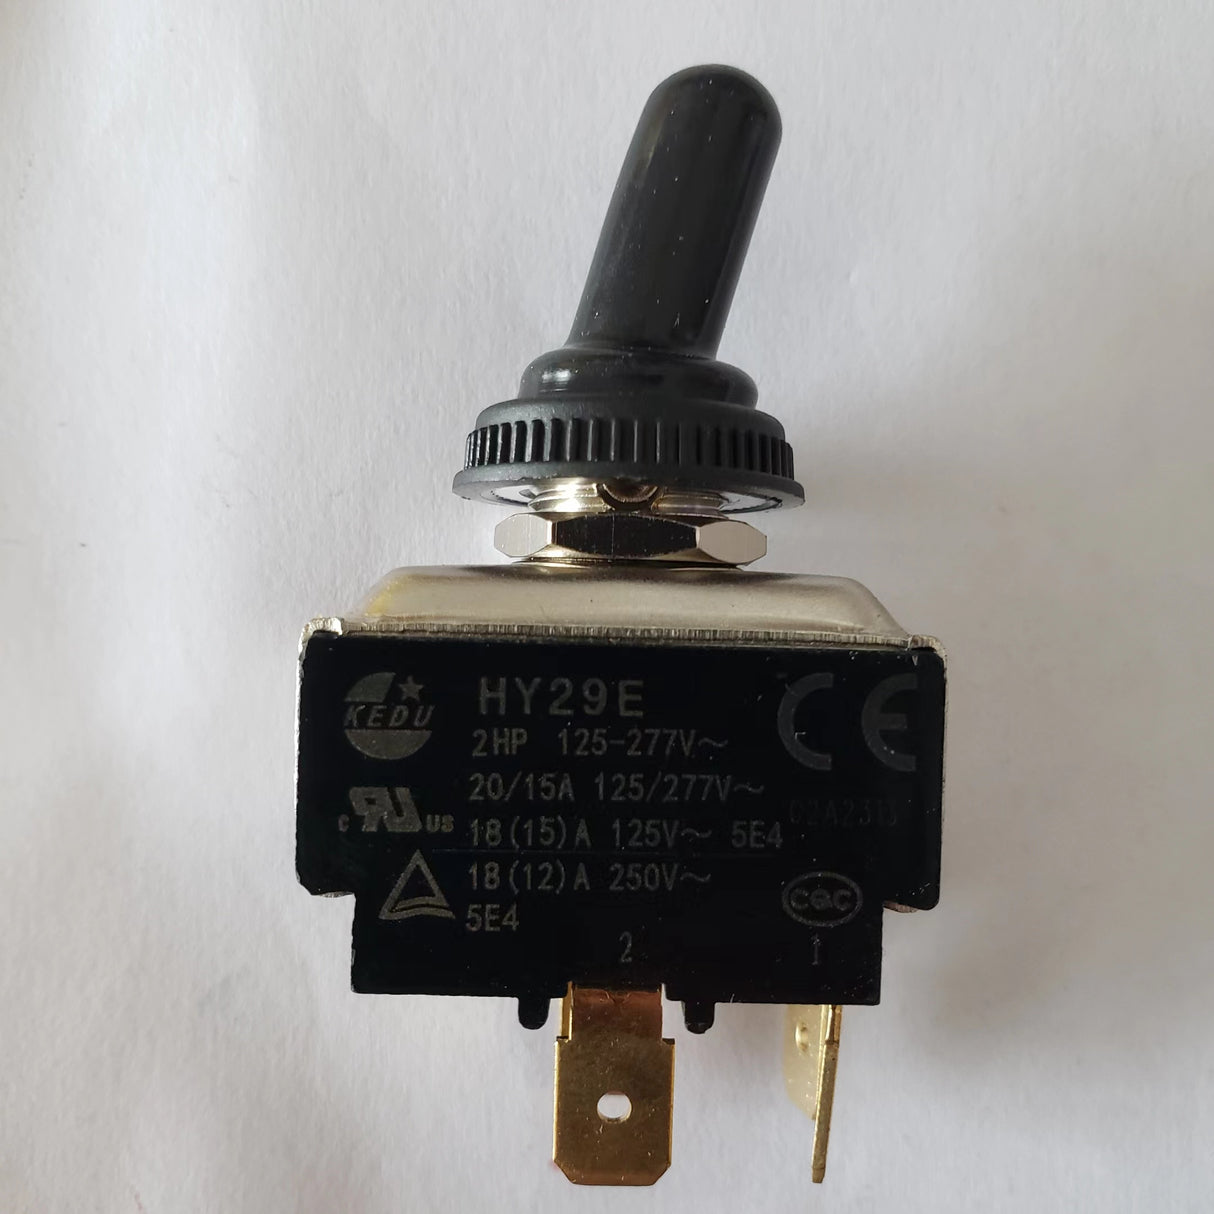 Kang Industrial Toggle Switch for BS-712N/RH, HY29E